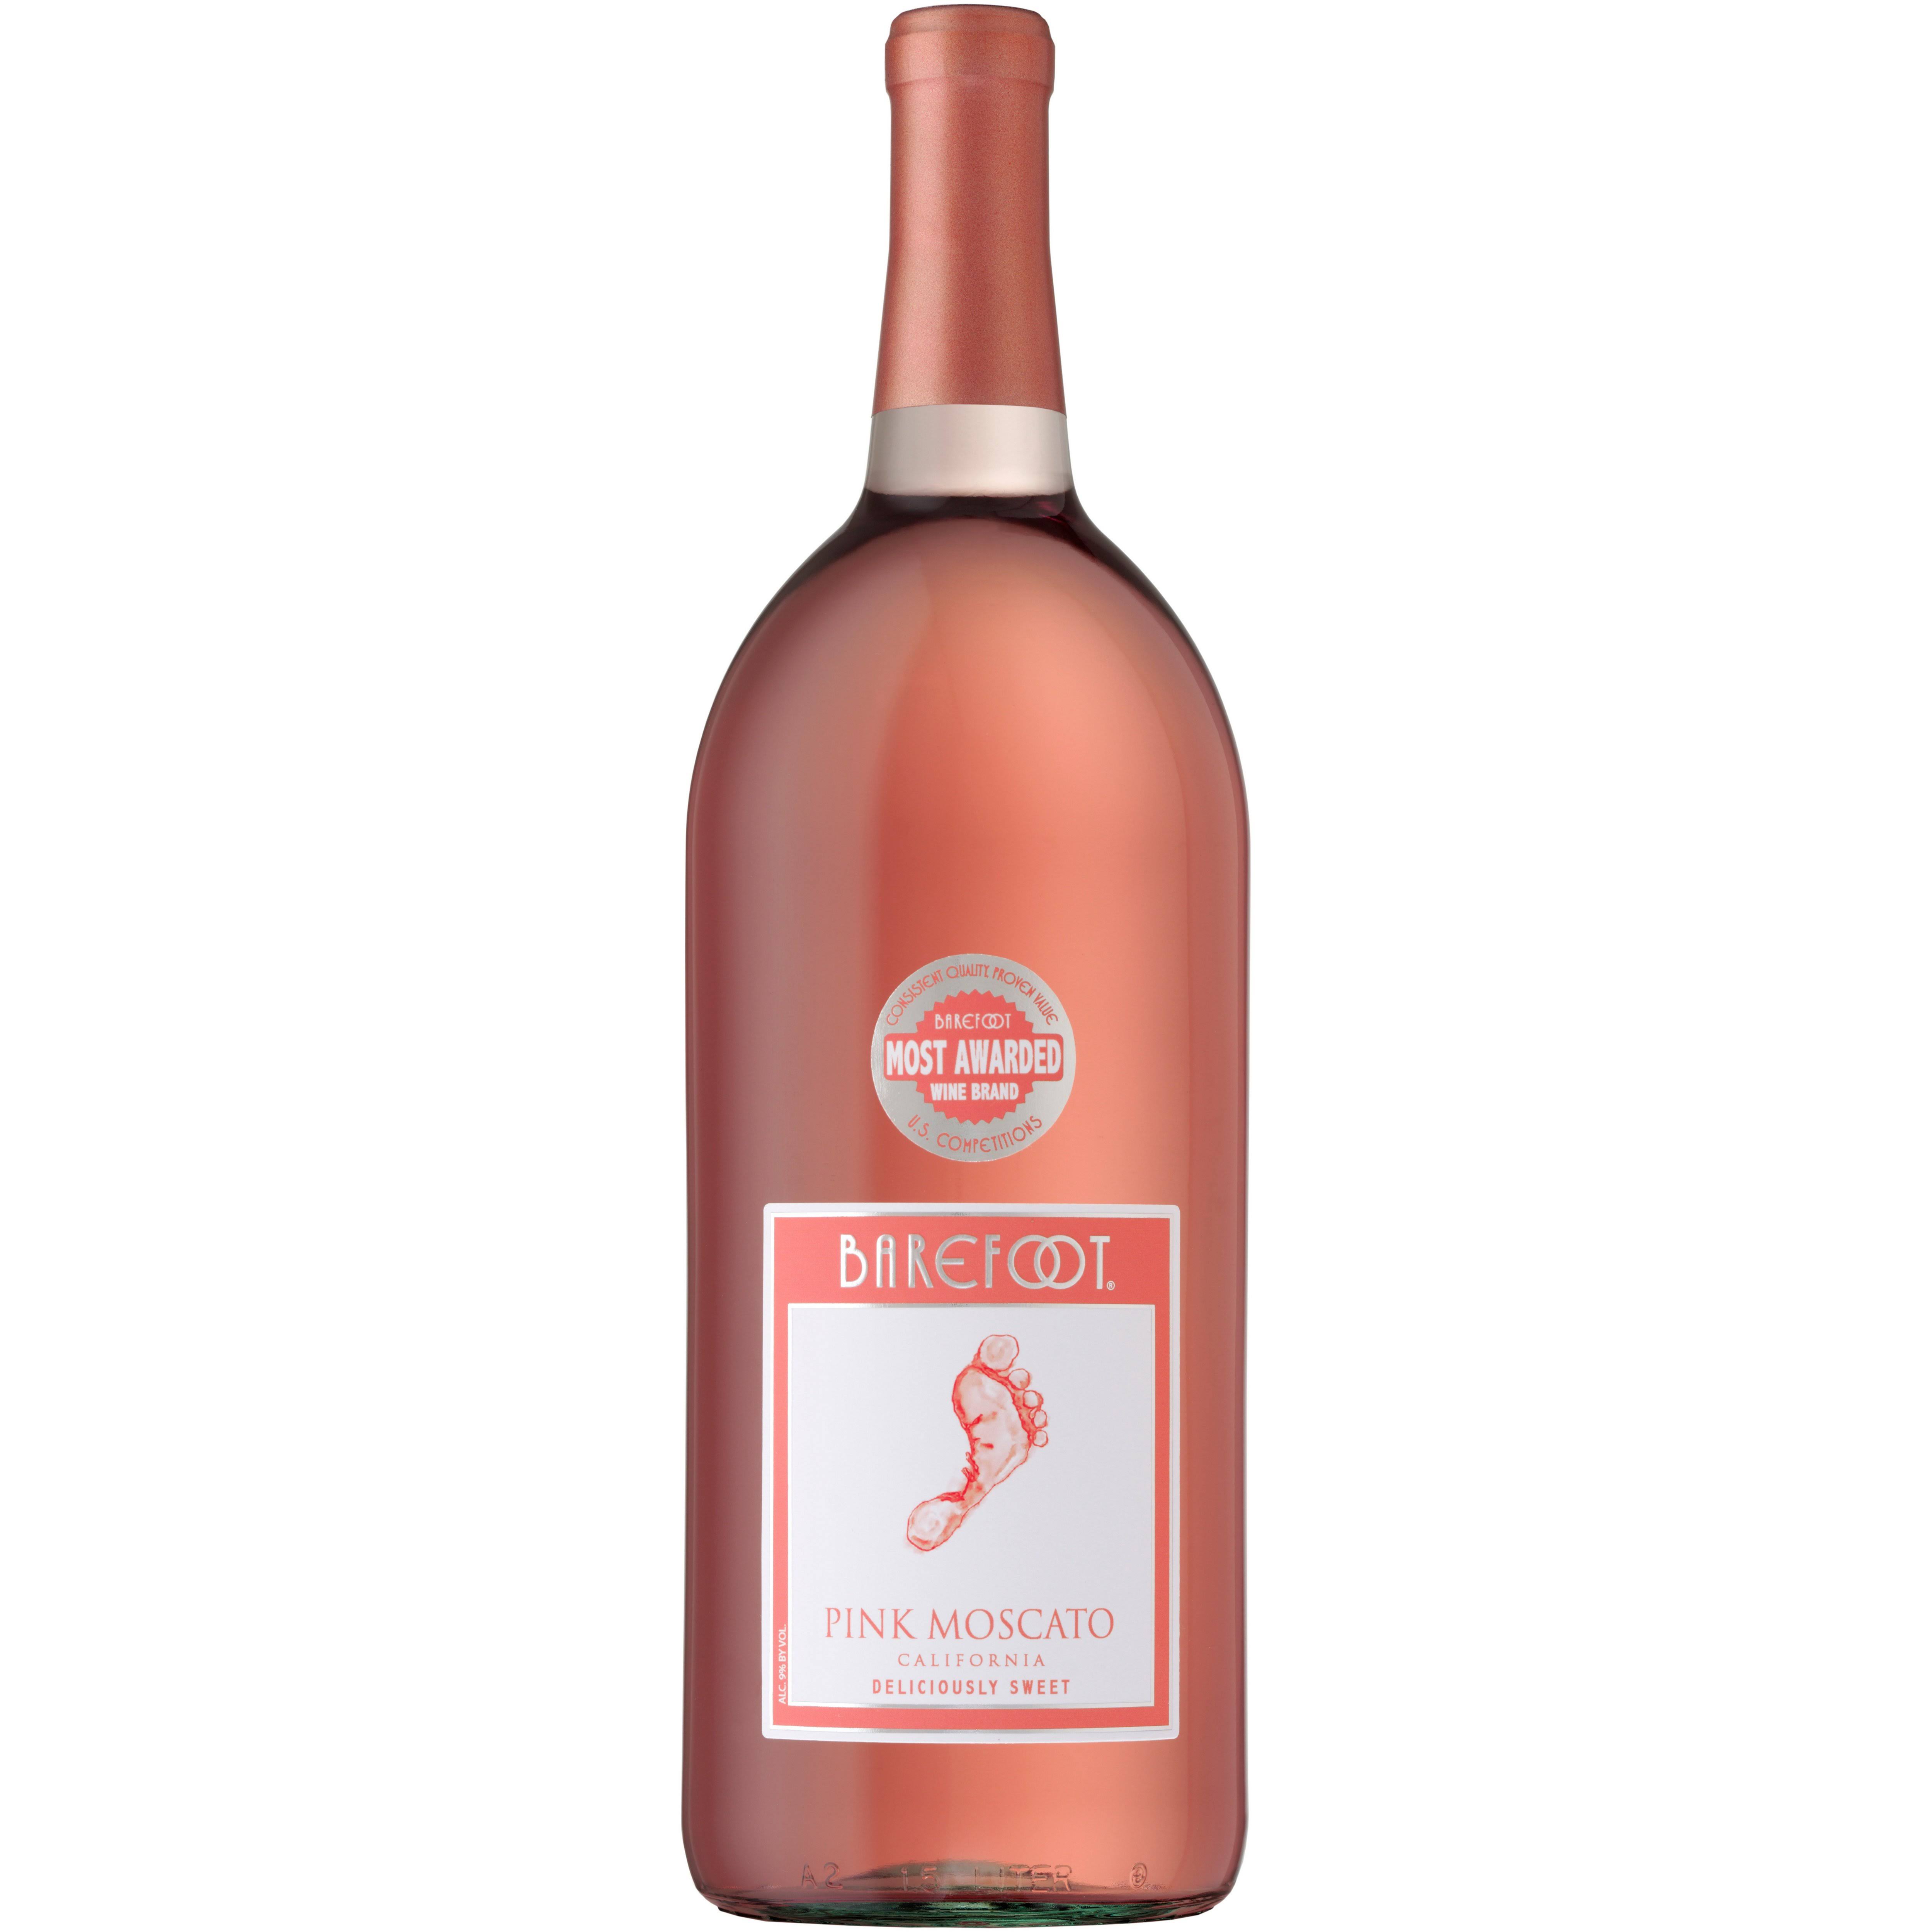 Barefoot Pink Moscato, California - 1.5 l